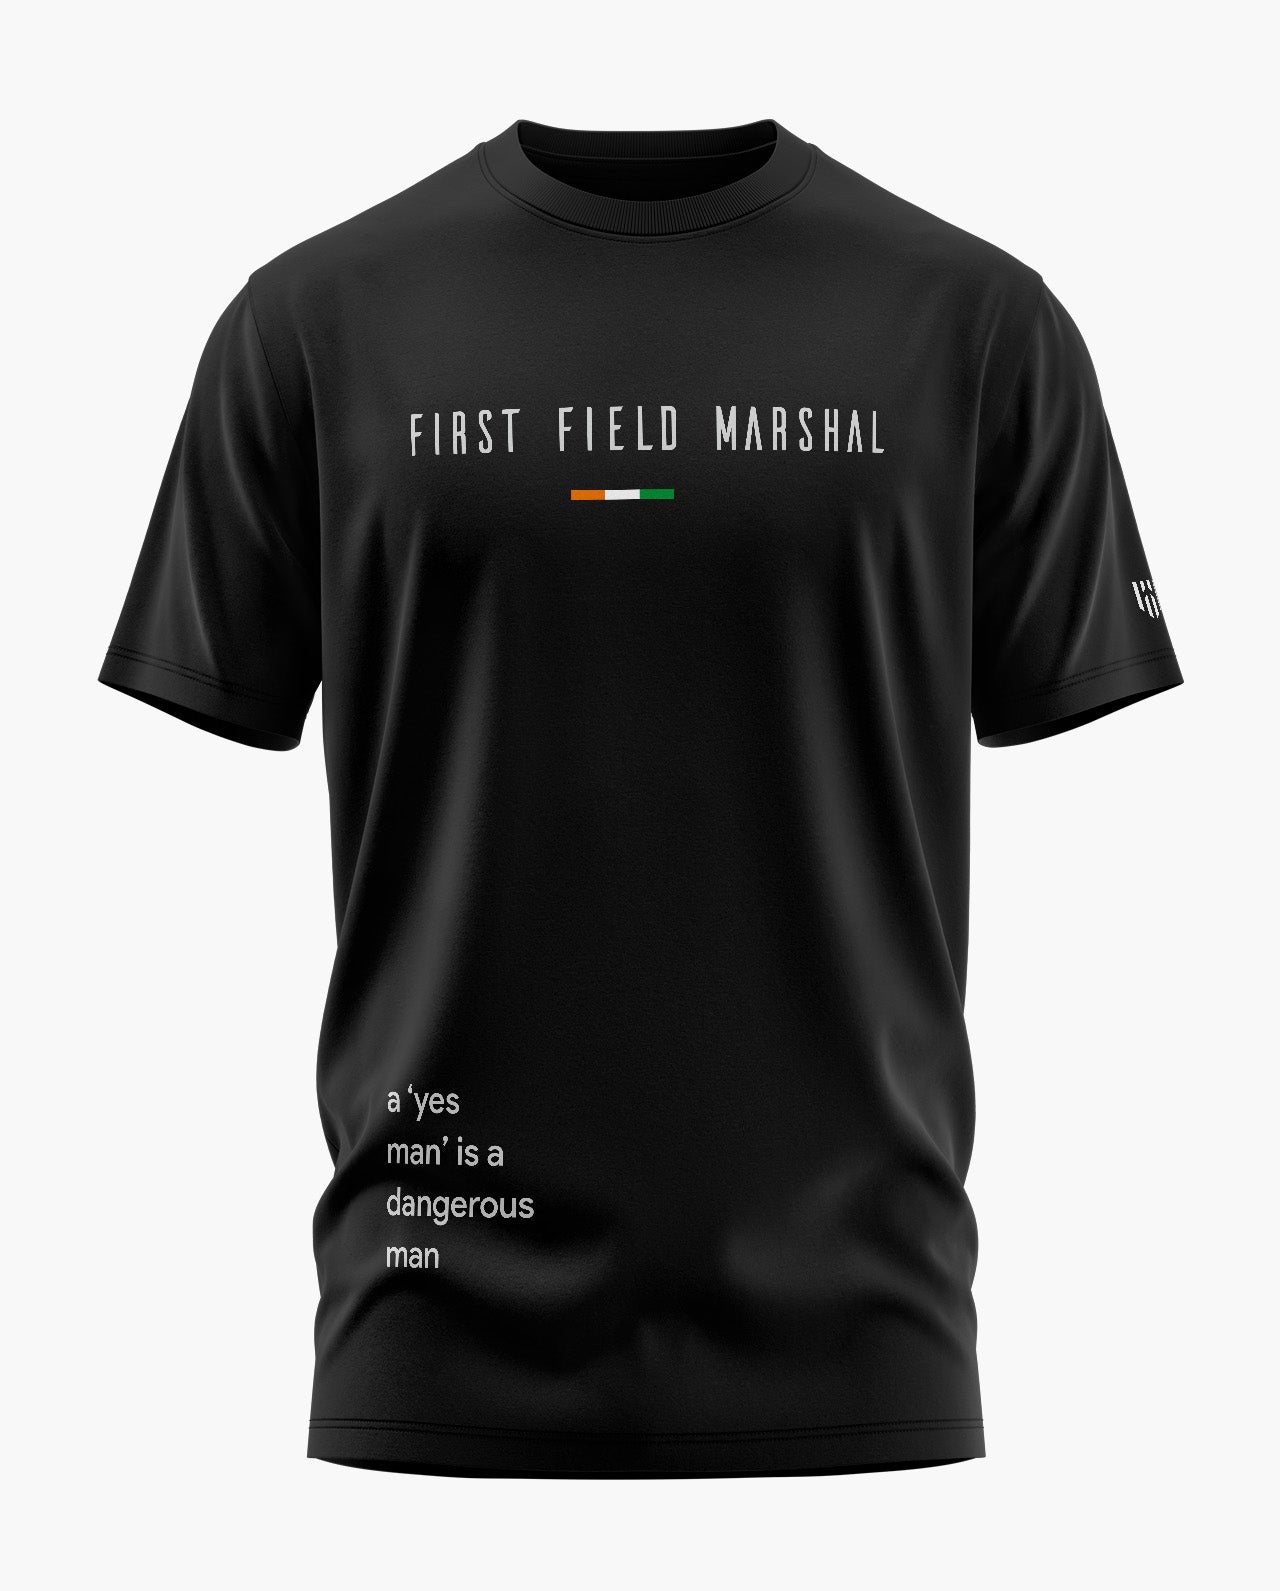 THE FIRST FIELD MARSHAL T-Shirt